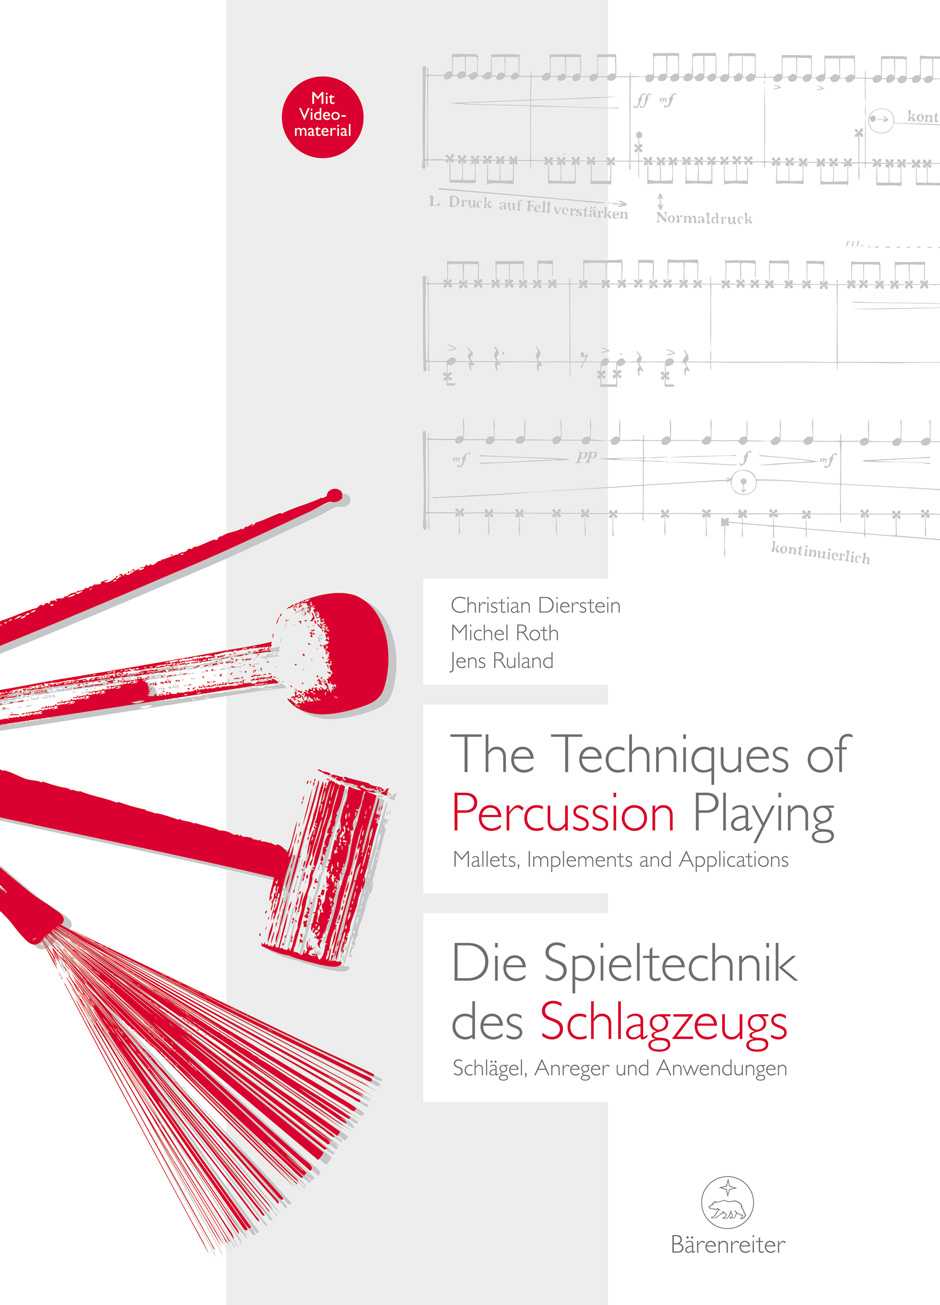 The Techniques of Percussion Playing by Dierstein, Roth and Jens